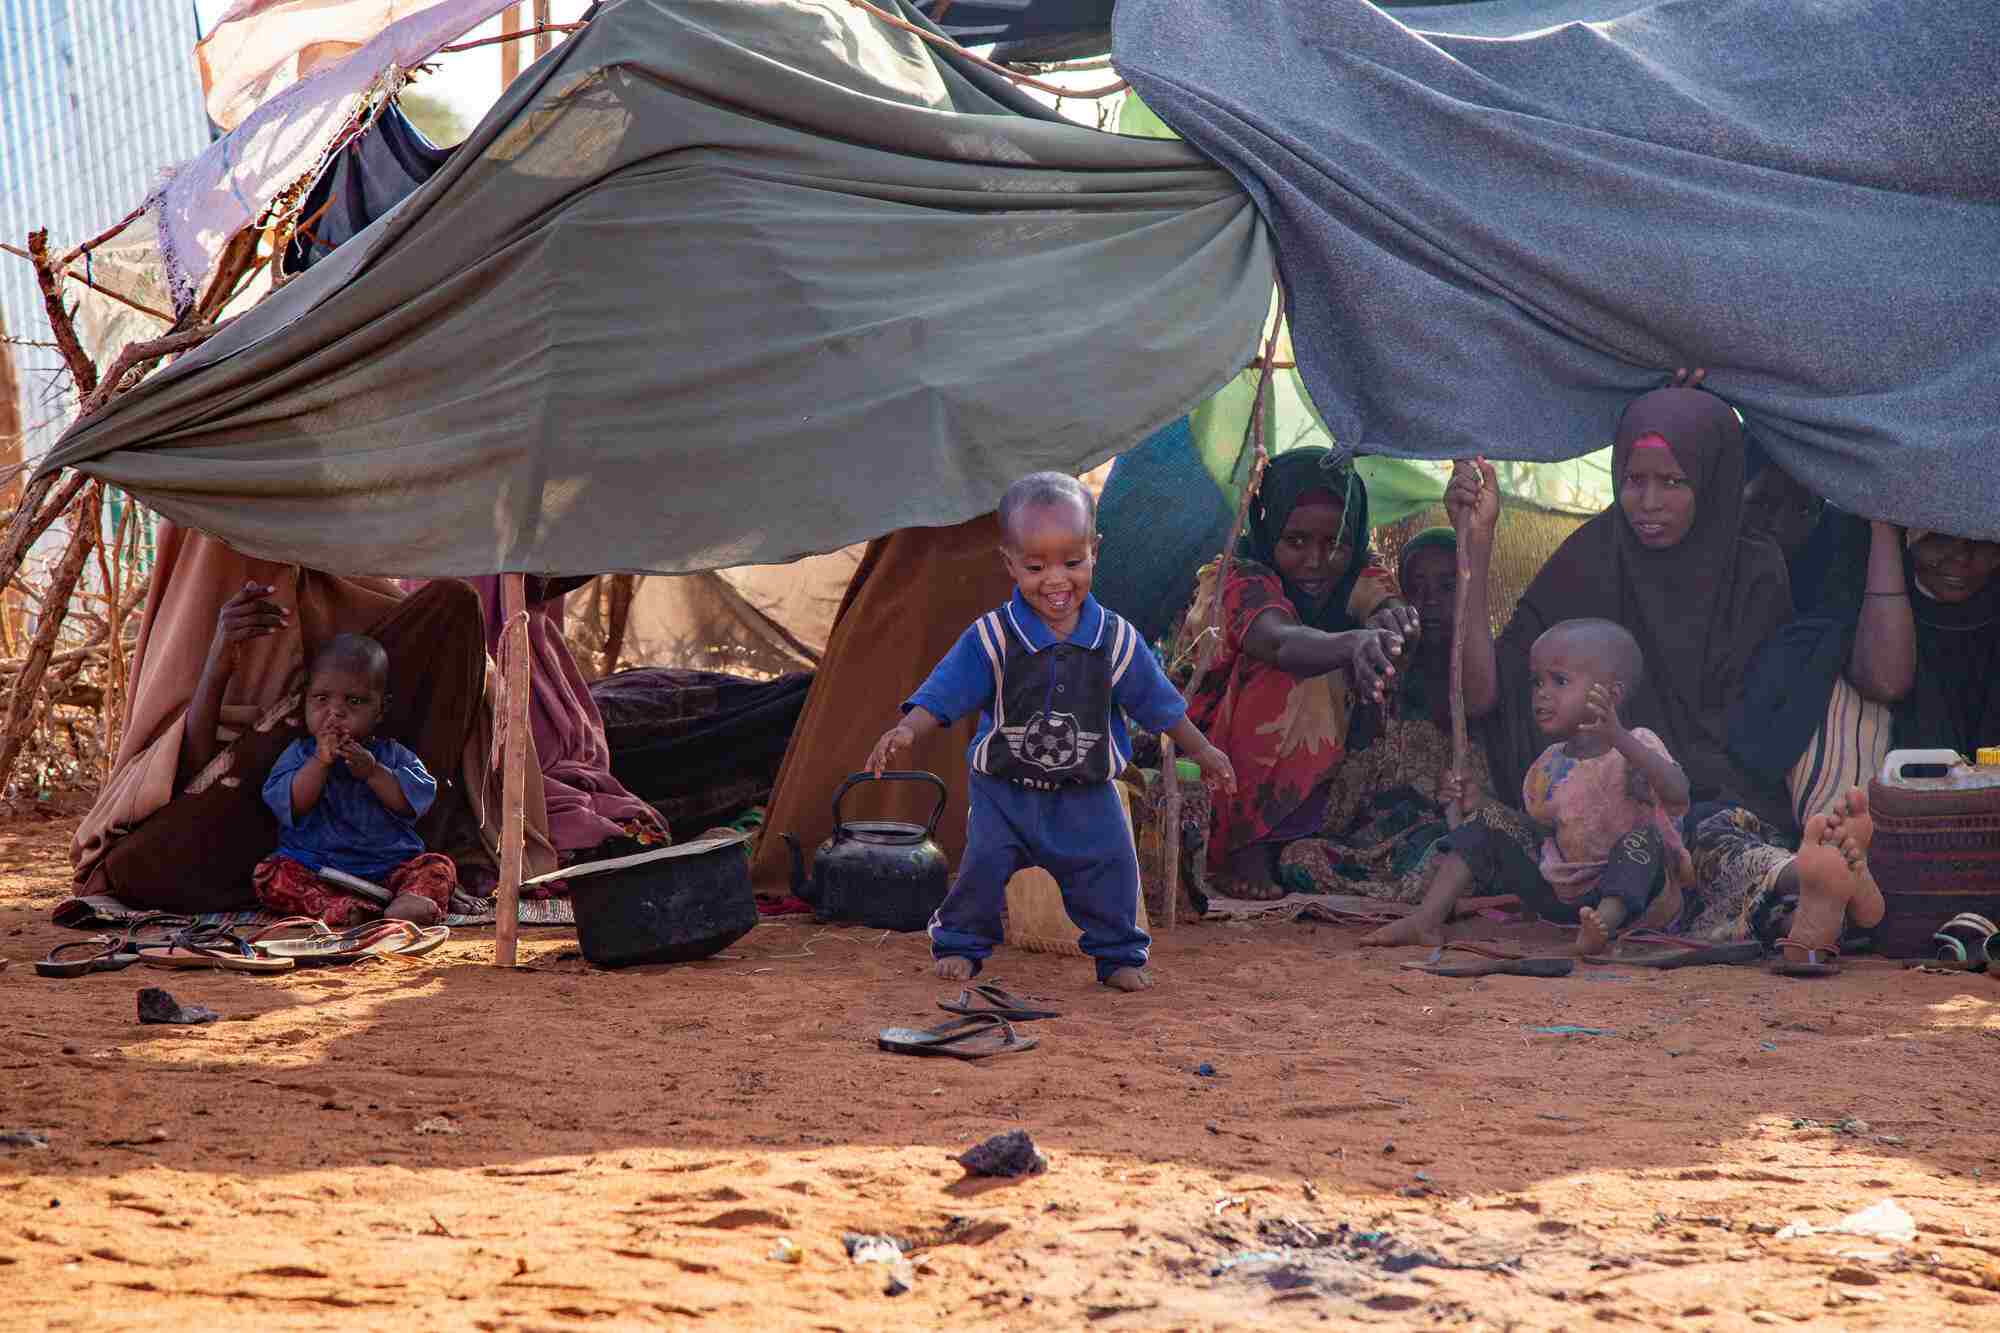 A toddler boy smiles as he walks out of a makeshift shelter. Women and children are seen in the shelter behind him.